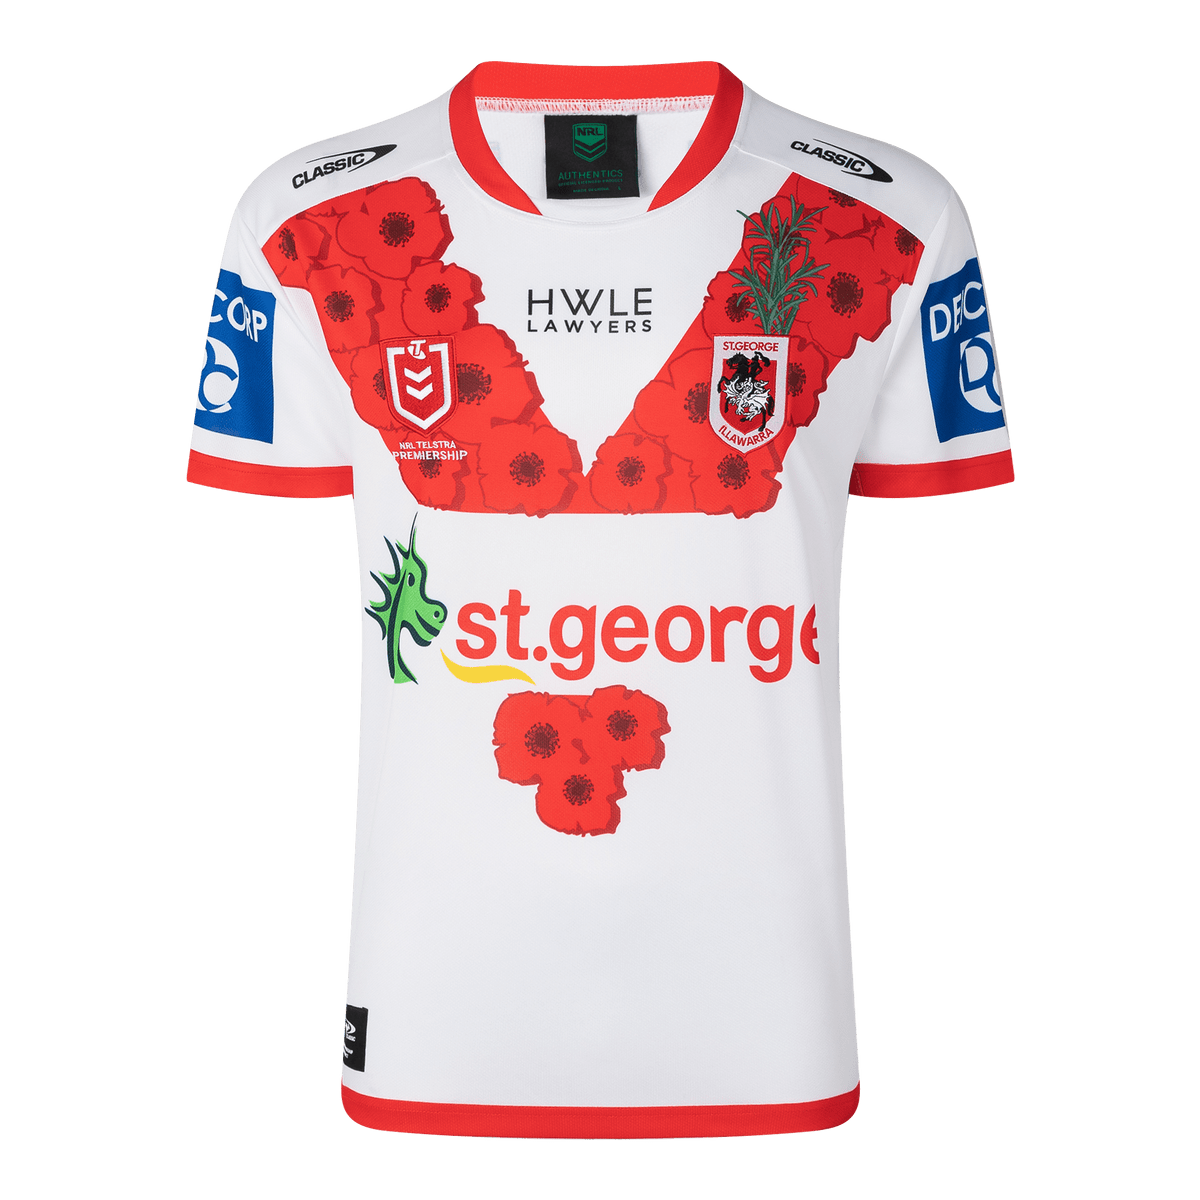 DRAGONSRETAIL-MENSANZACJERSEY2022-FRONT_efa0d38f-a1ab-4791-9358-a305526e9536_1200x.png